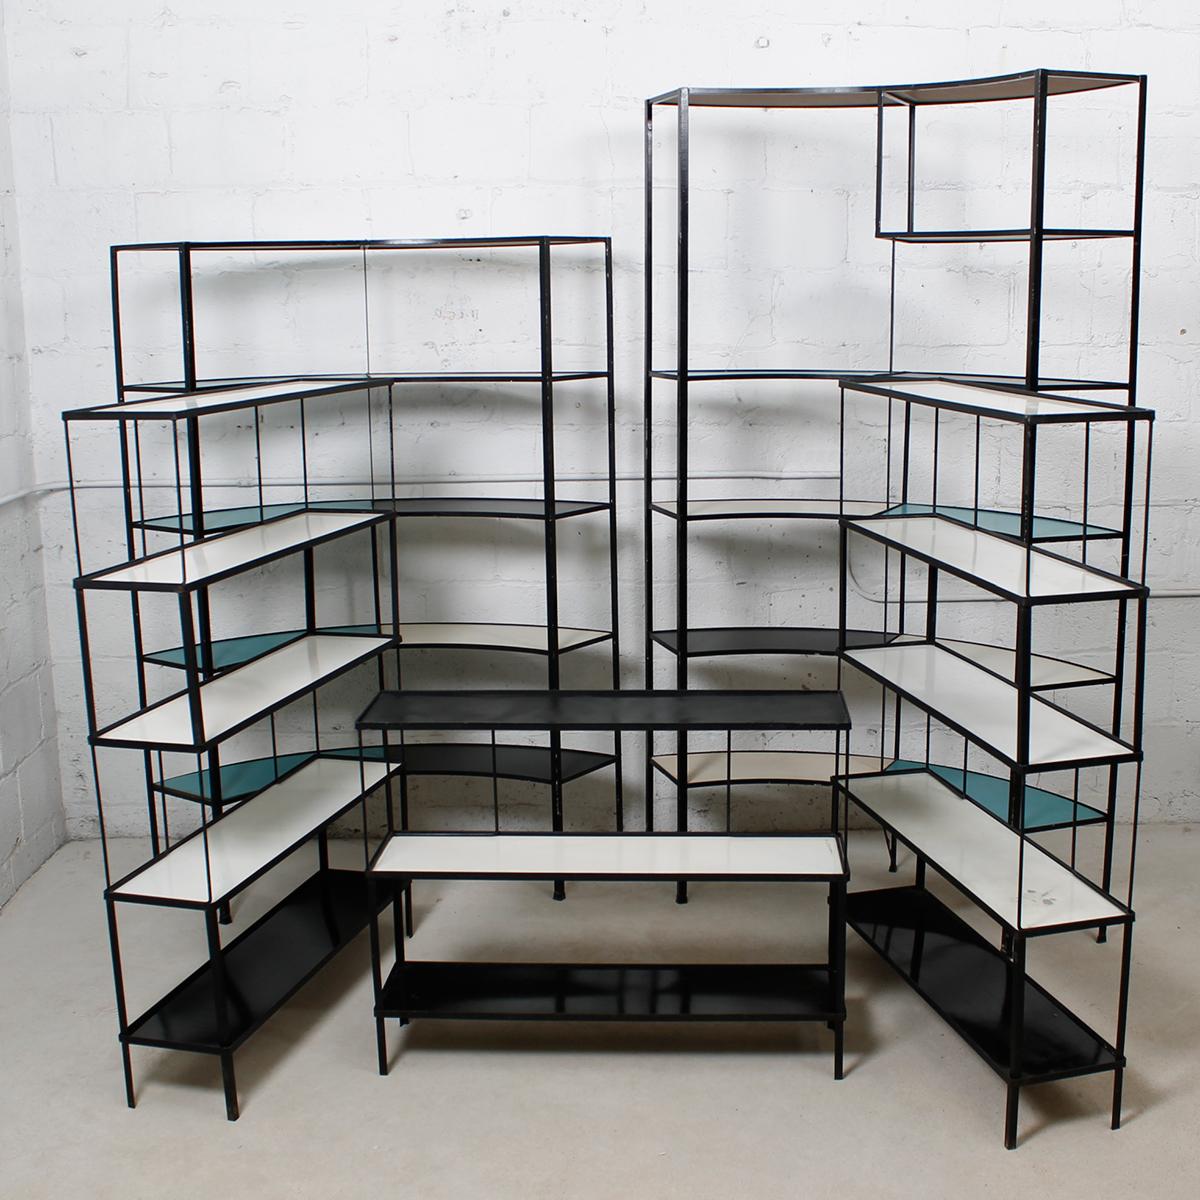 Set of Rare Multi-Color Curved Shelving Units by Frederick Weinberg

Additional information:
Material: Iron
Very cool, very ’50s-evocative modular bookshelf system in iron by Frederick Weinberg.
Manufactured in iron, these units detach and fit